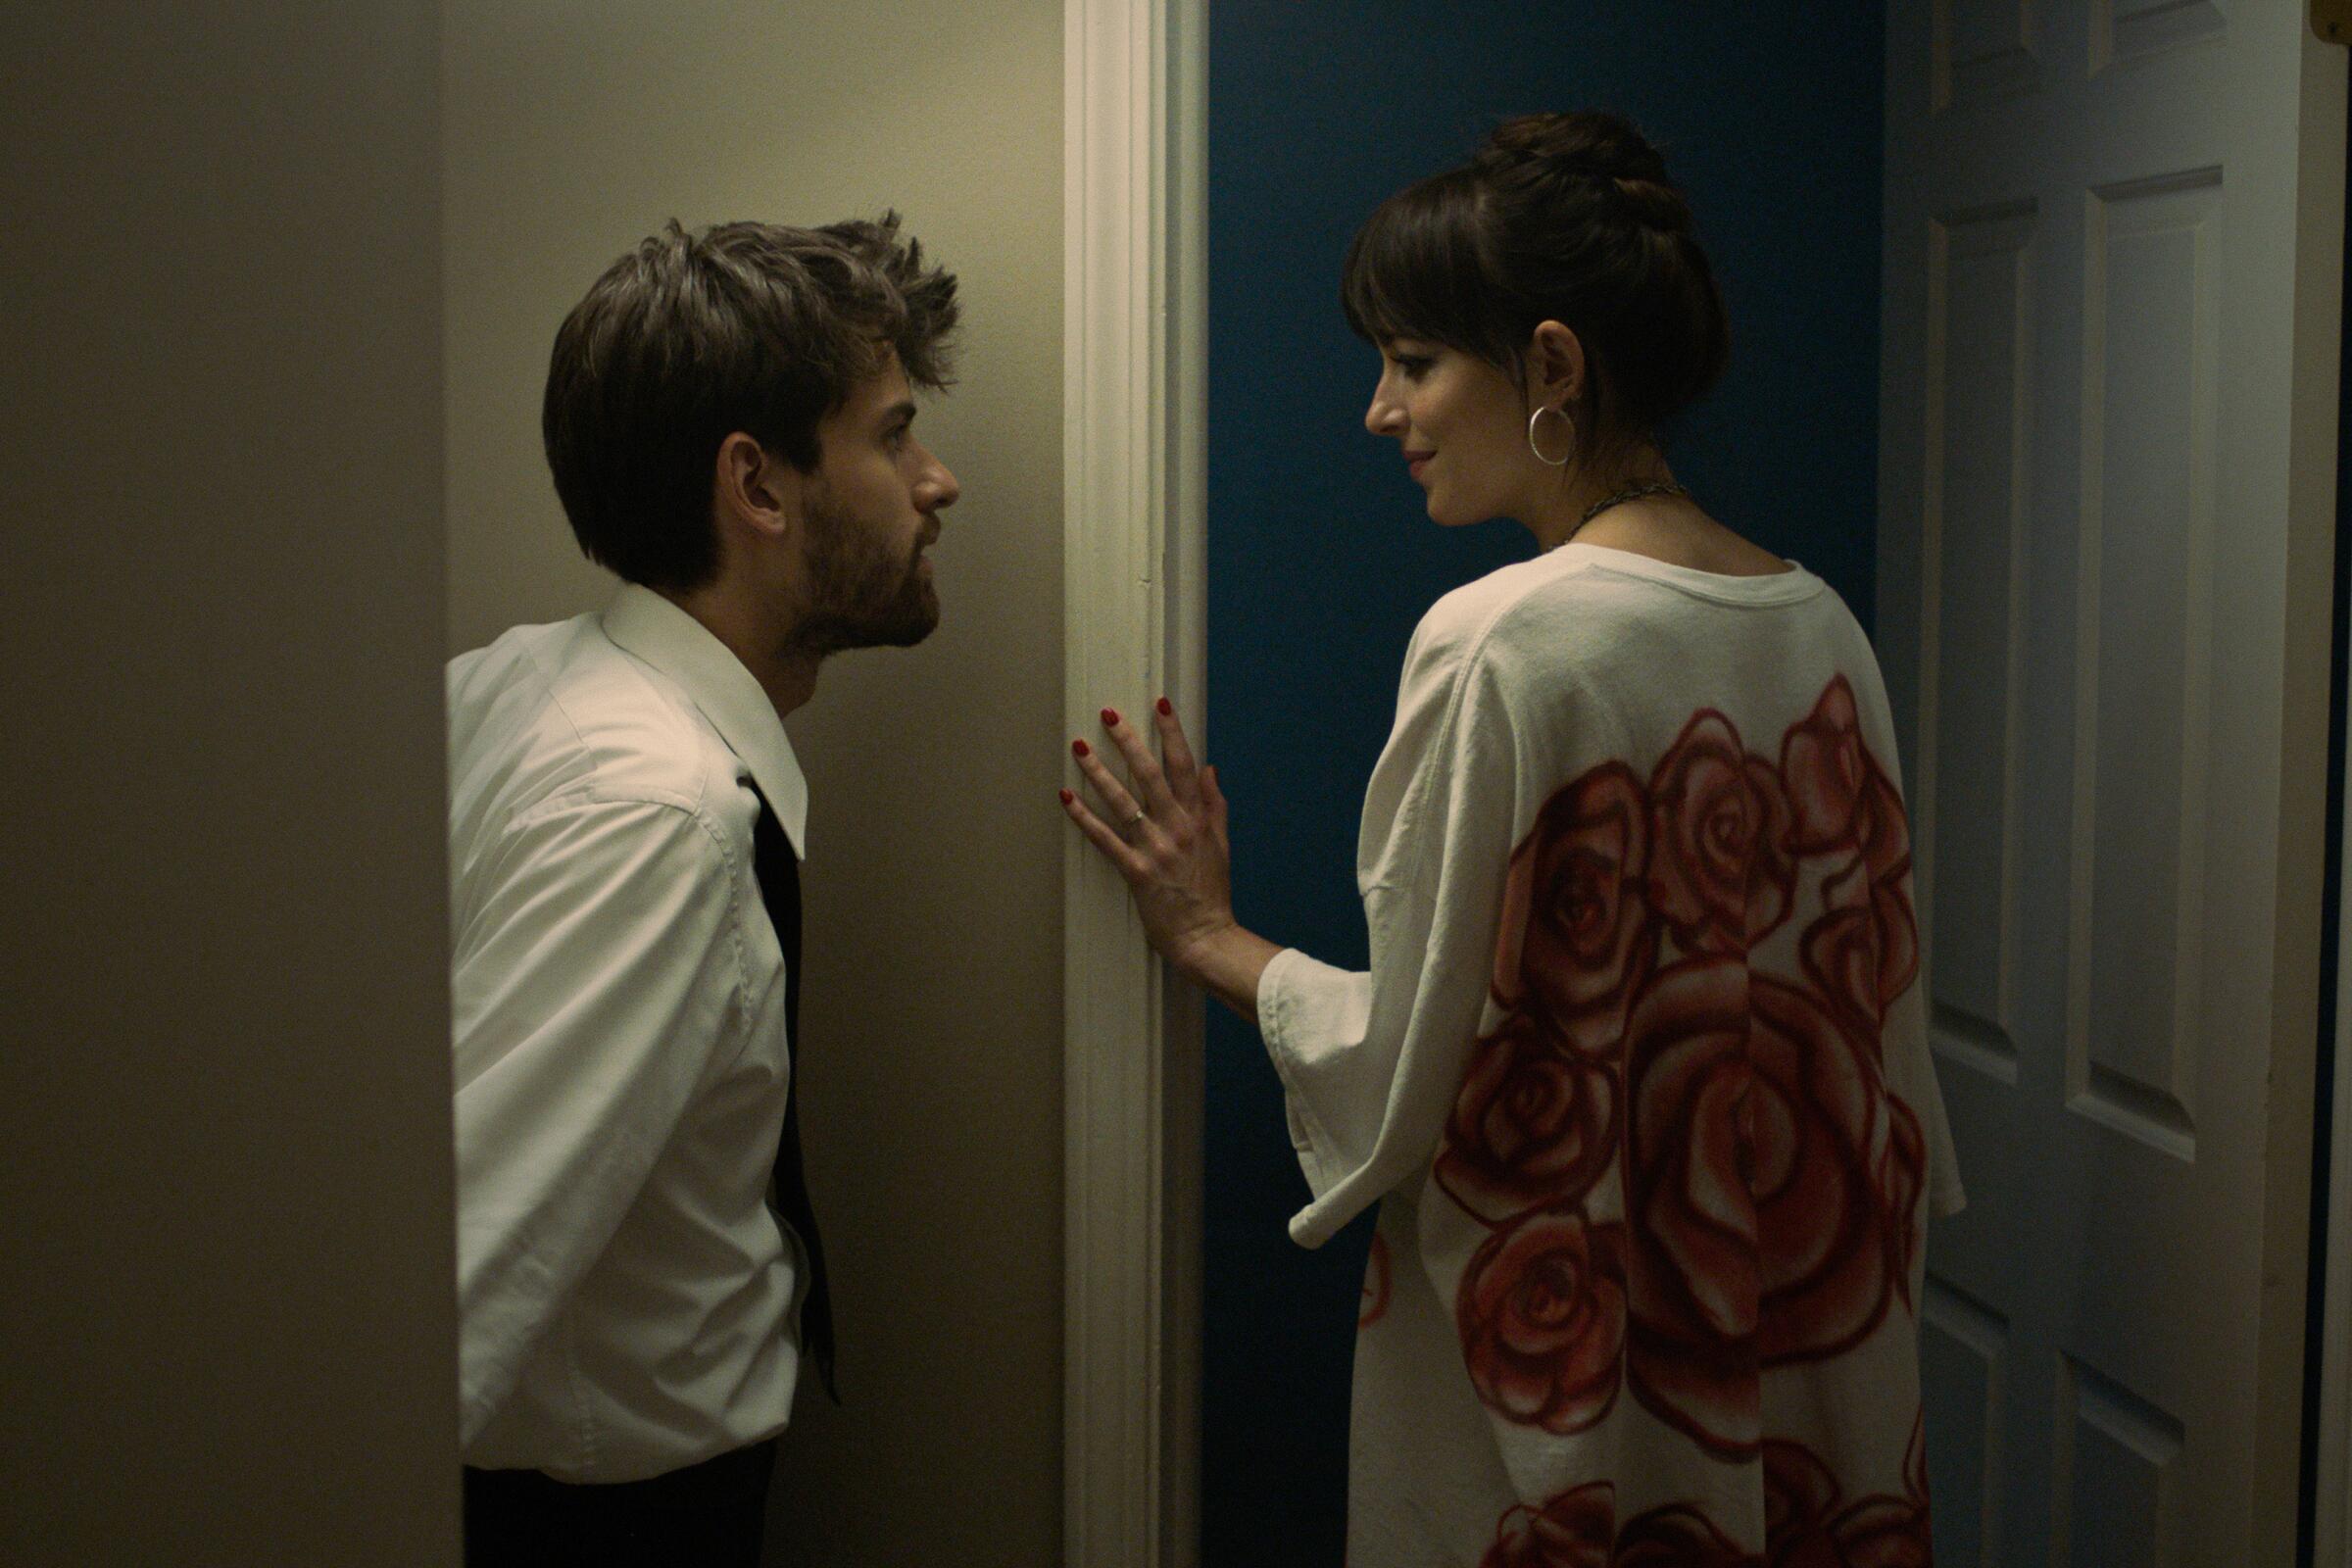 A man talks to a woman while she enters a doorway